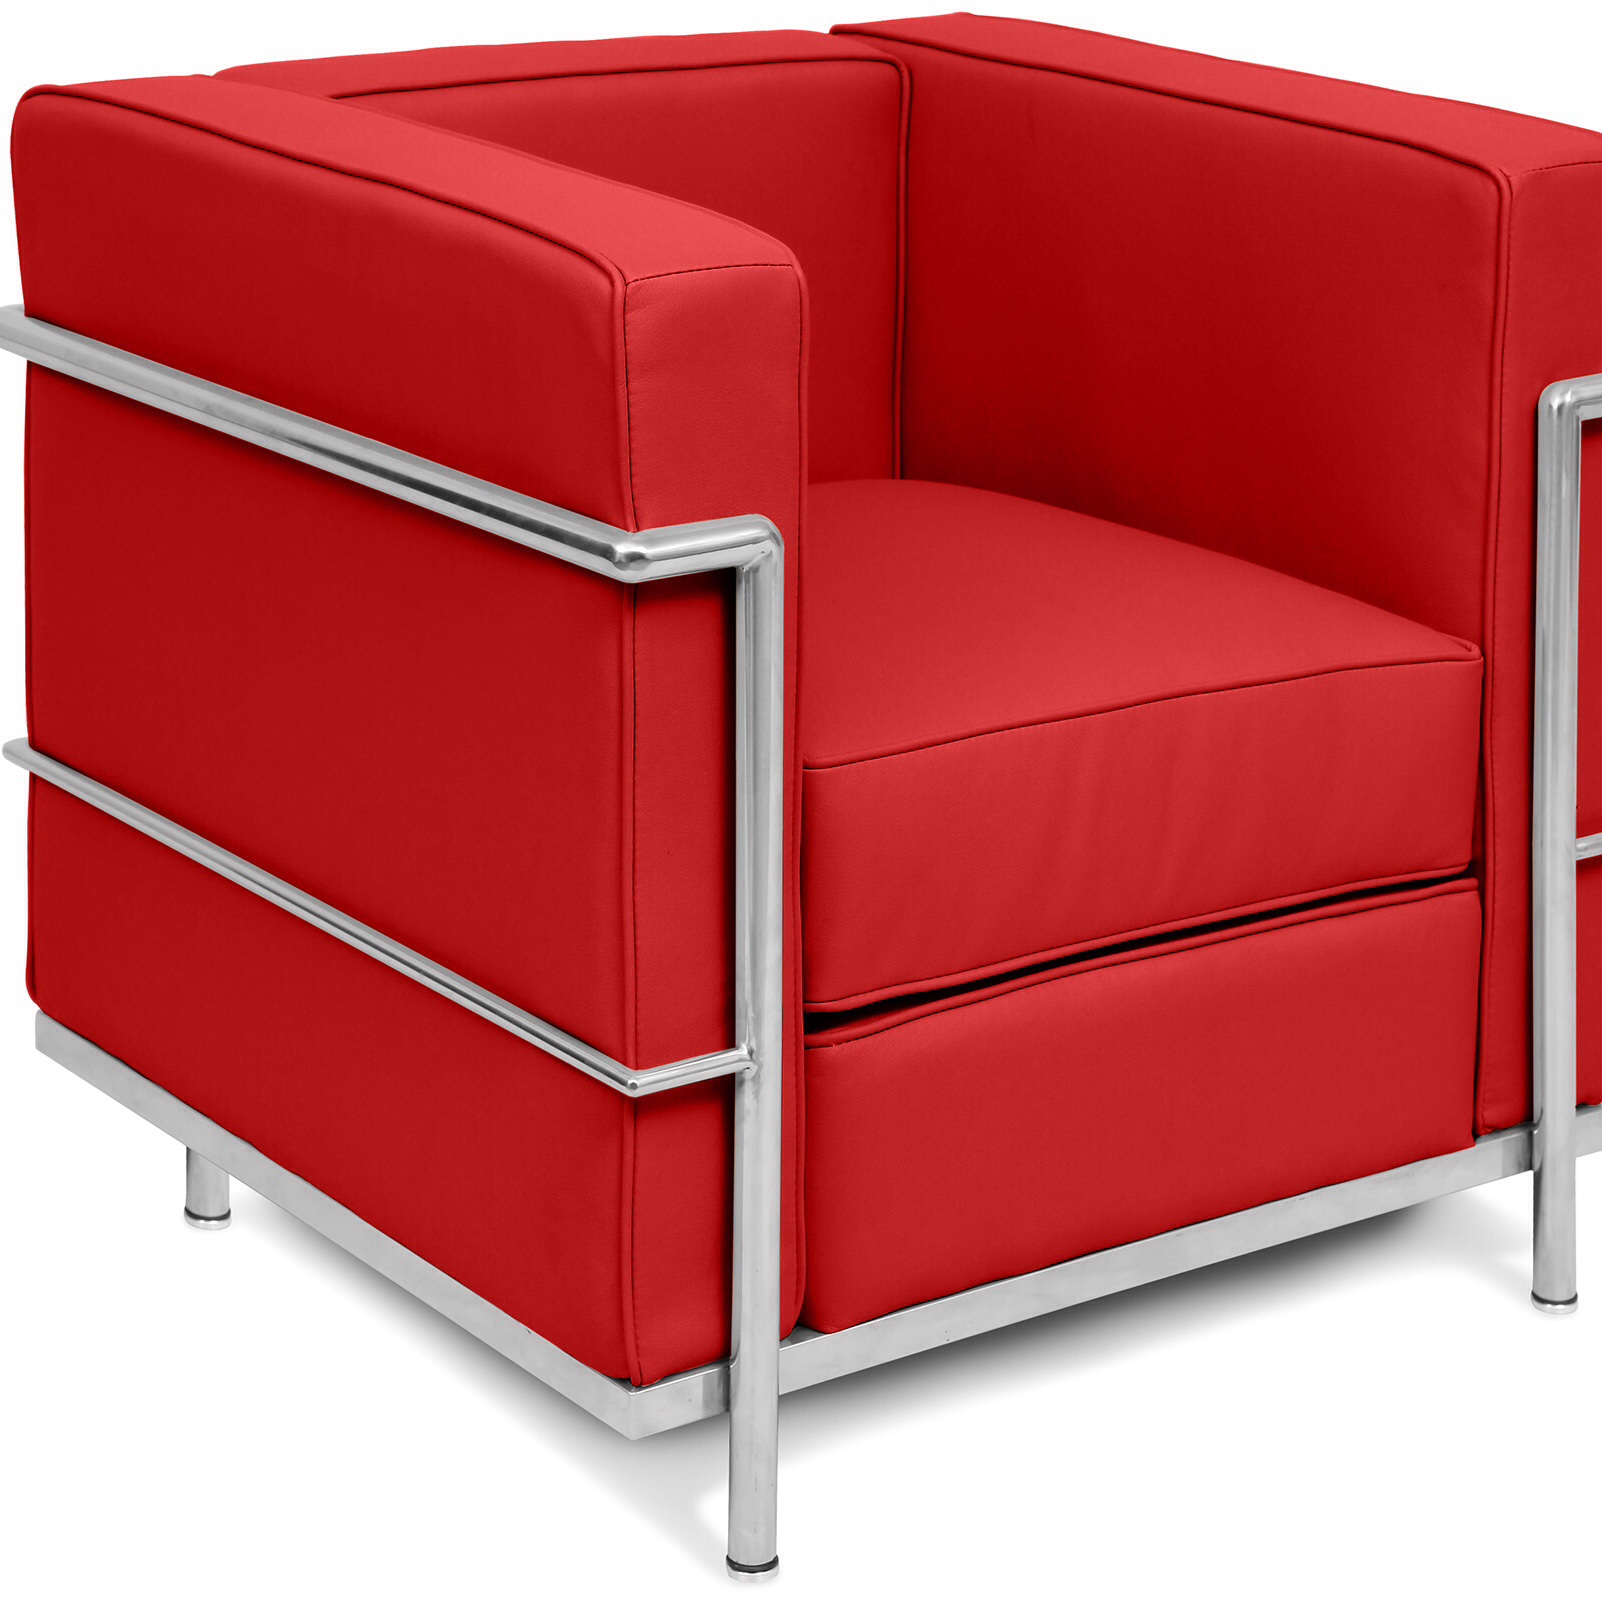 Bright coloured Corbusier style armchair Red